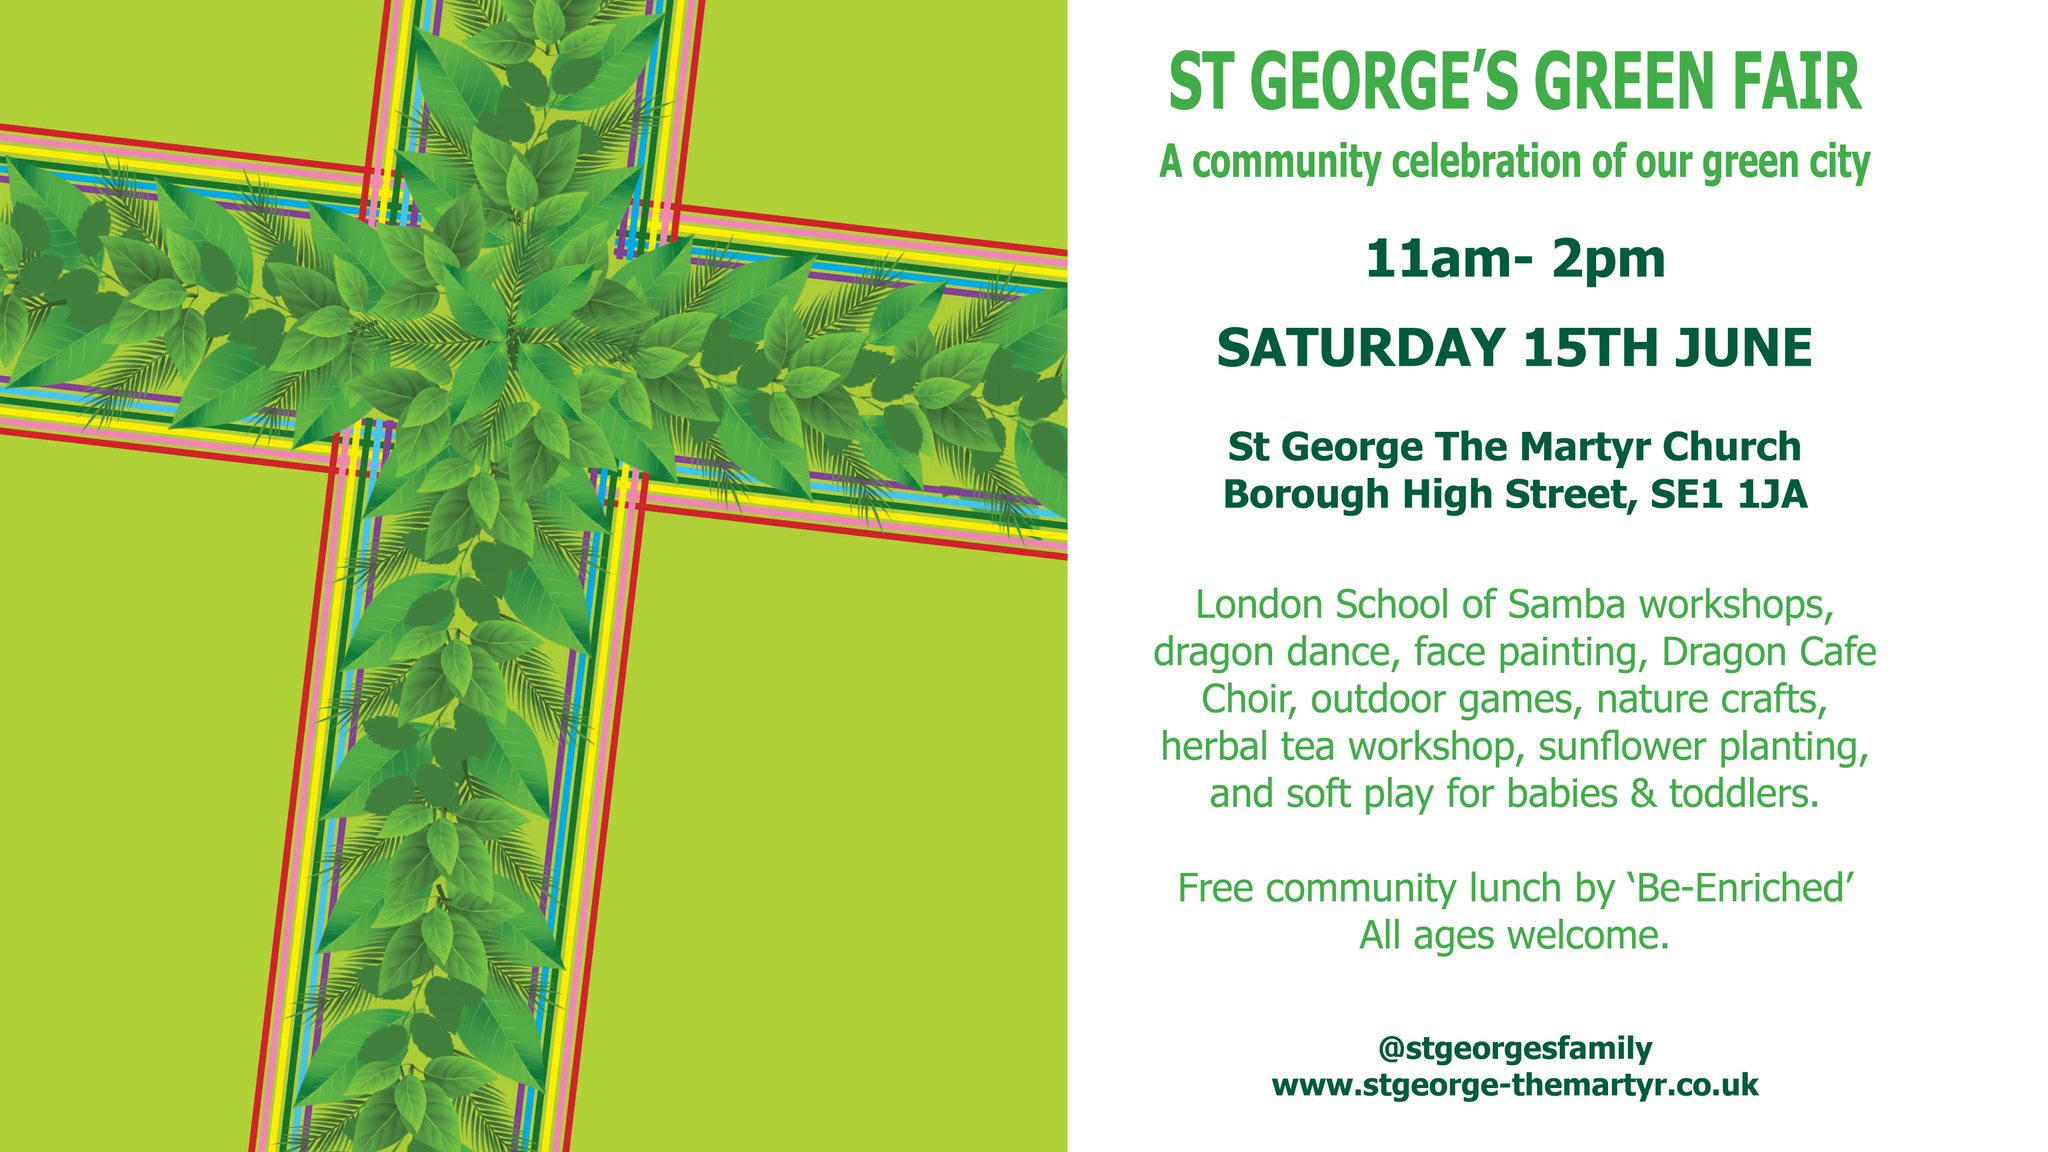 St George's Green Fair at St George the Martyr